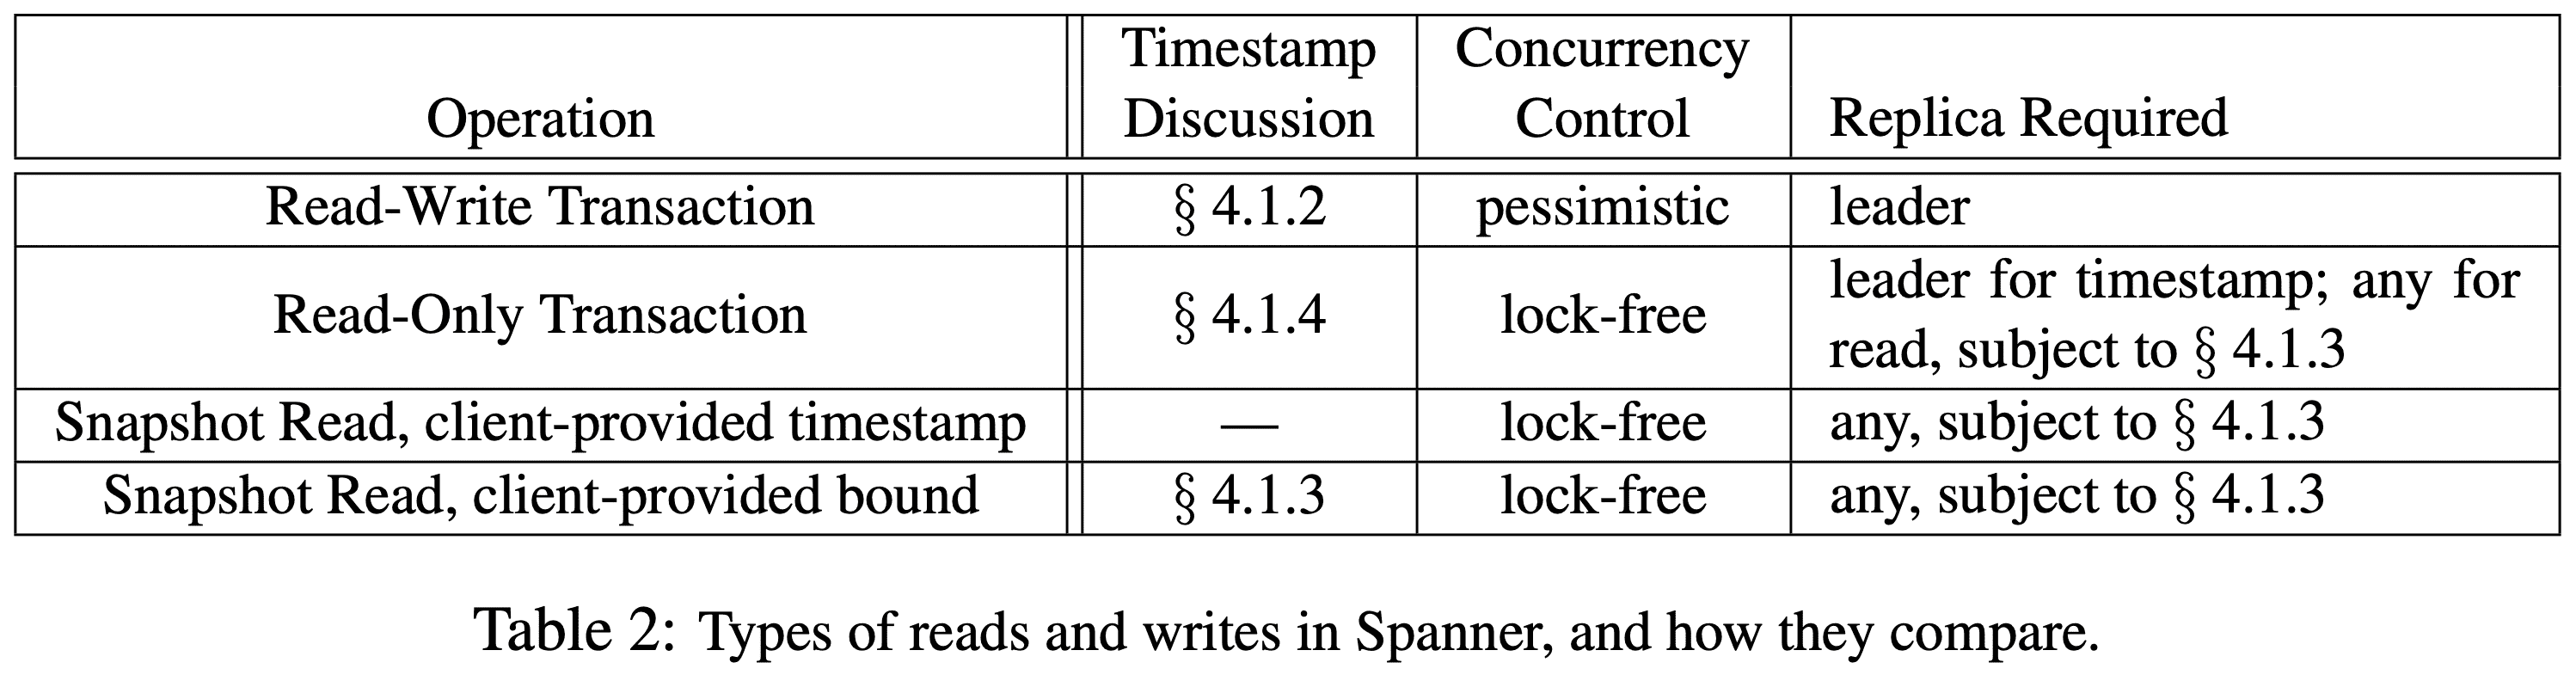 types of reads and writes in spanner and how they compare